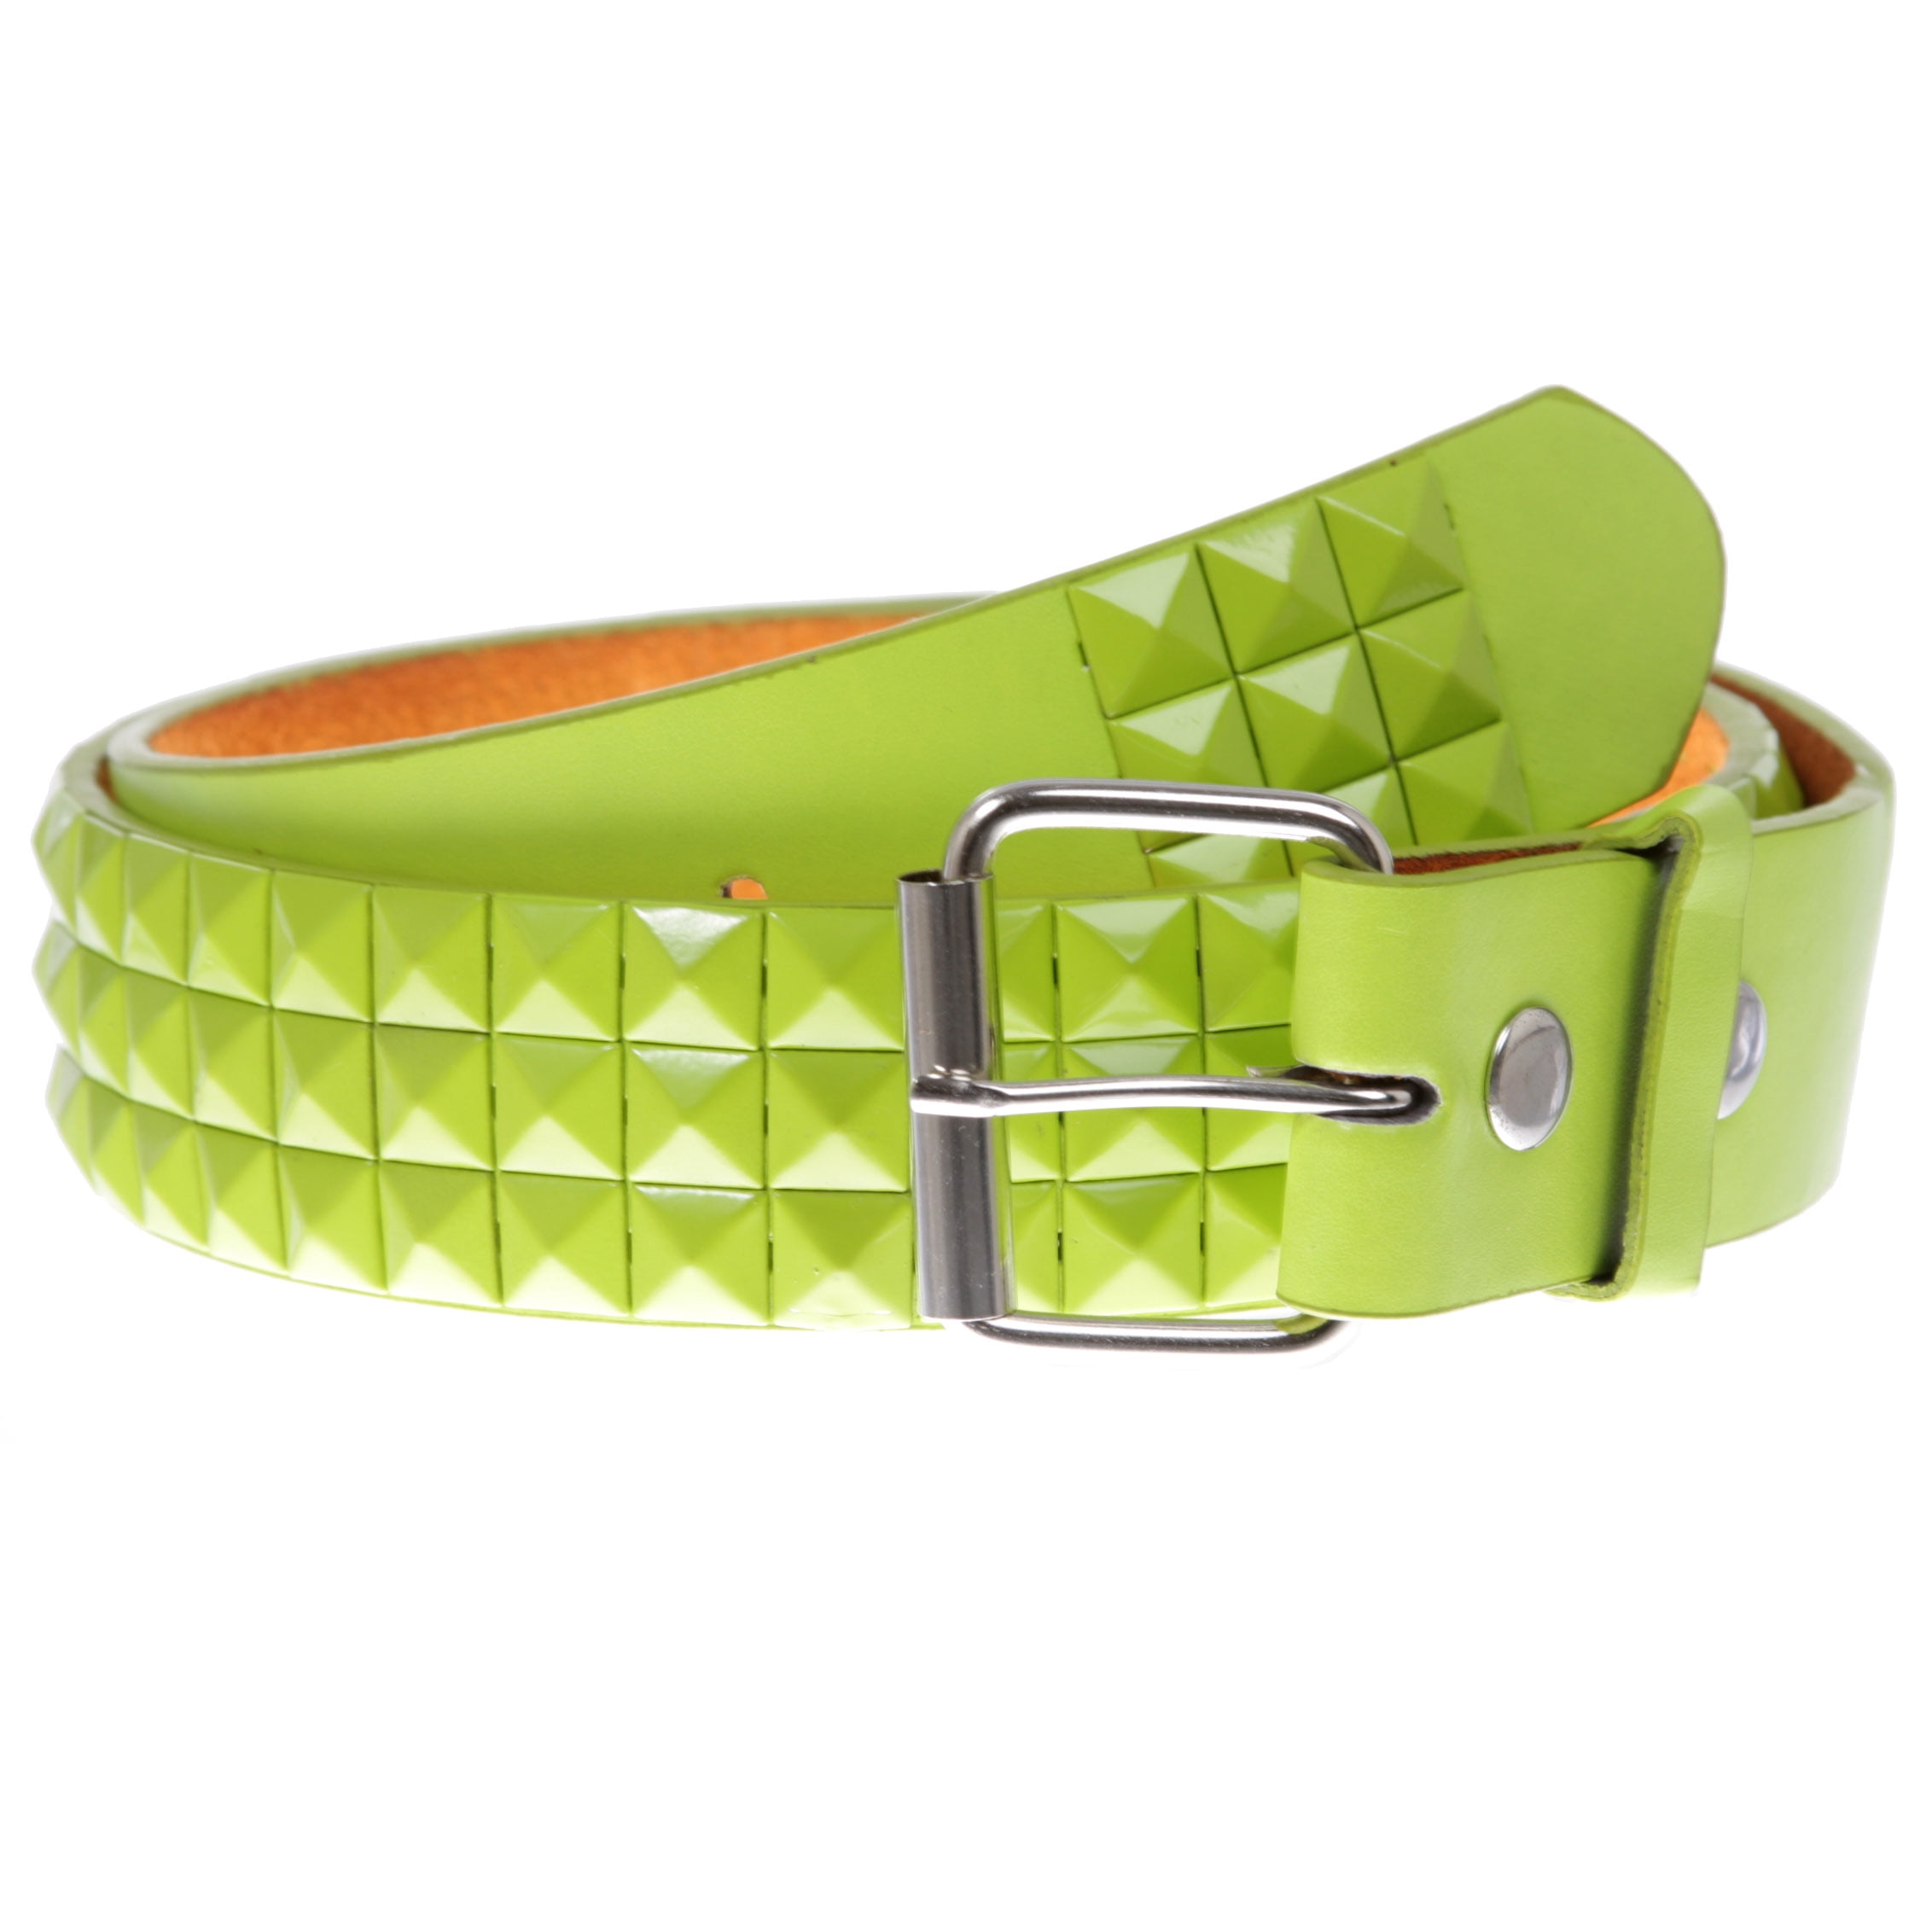 WOMEN'S LEATHER BELTS 6 ROWS SMALL PYRAMIDS STUDS 1.5" WIDE BELTS IN 6 COLOURS 